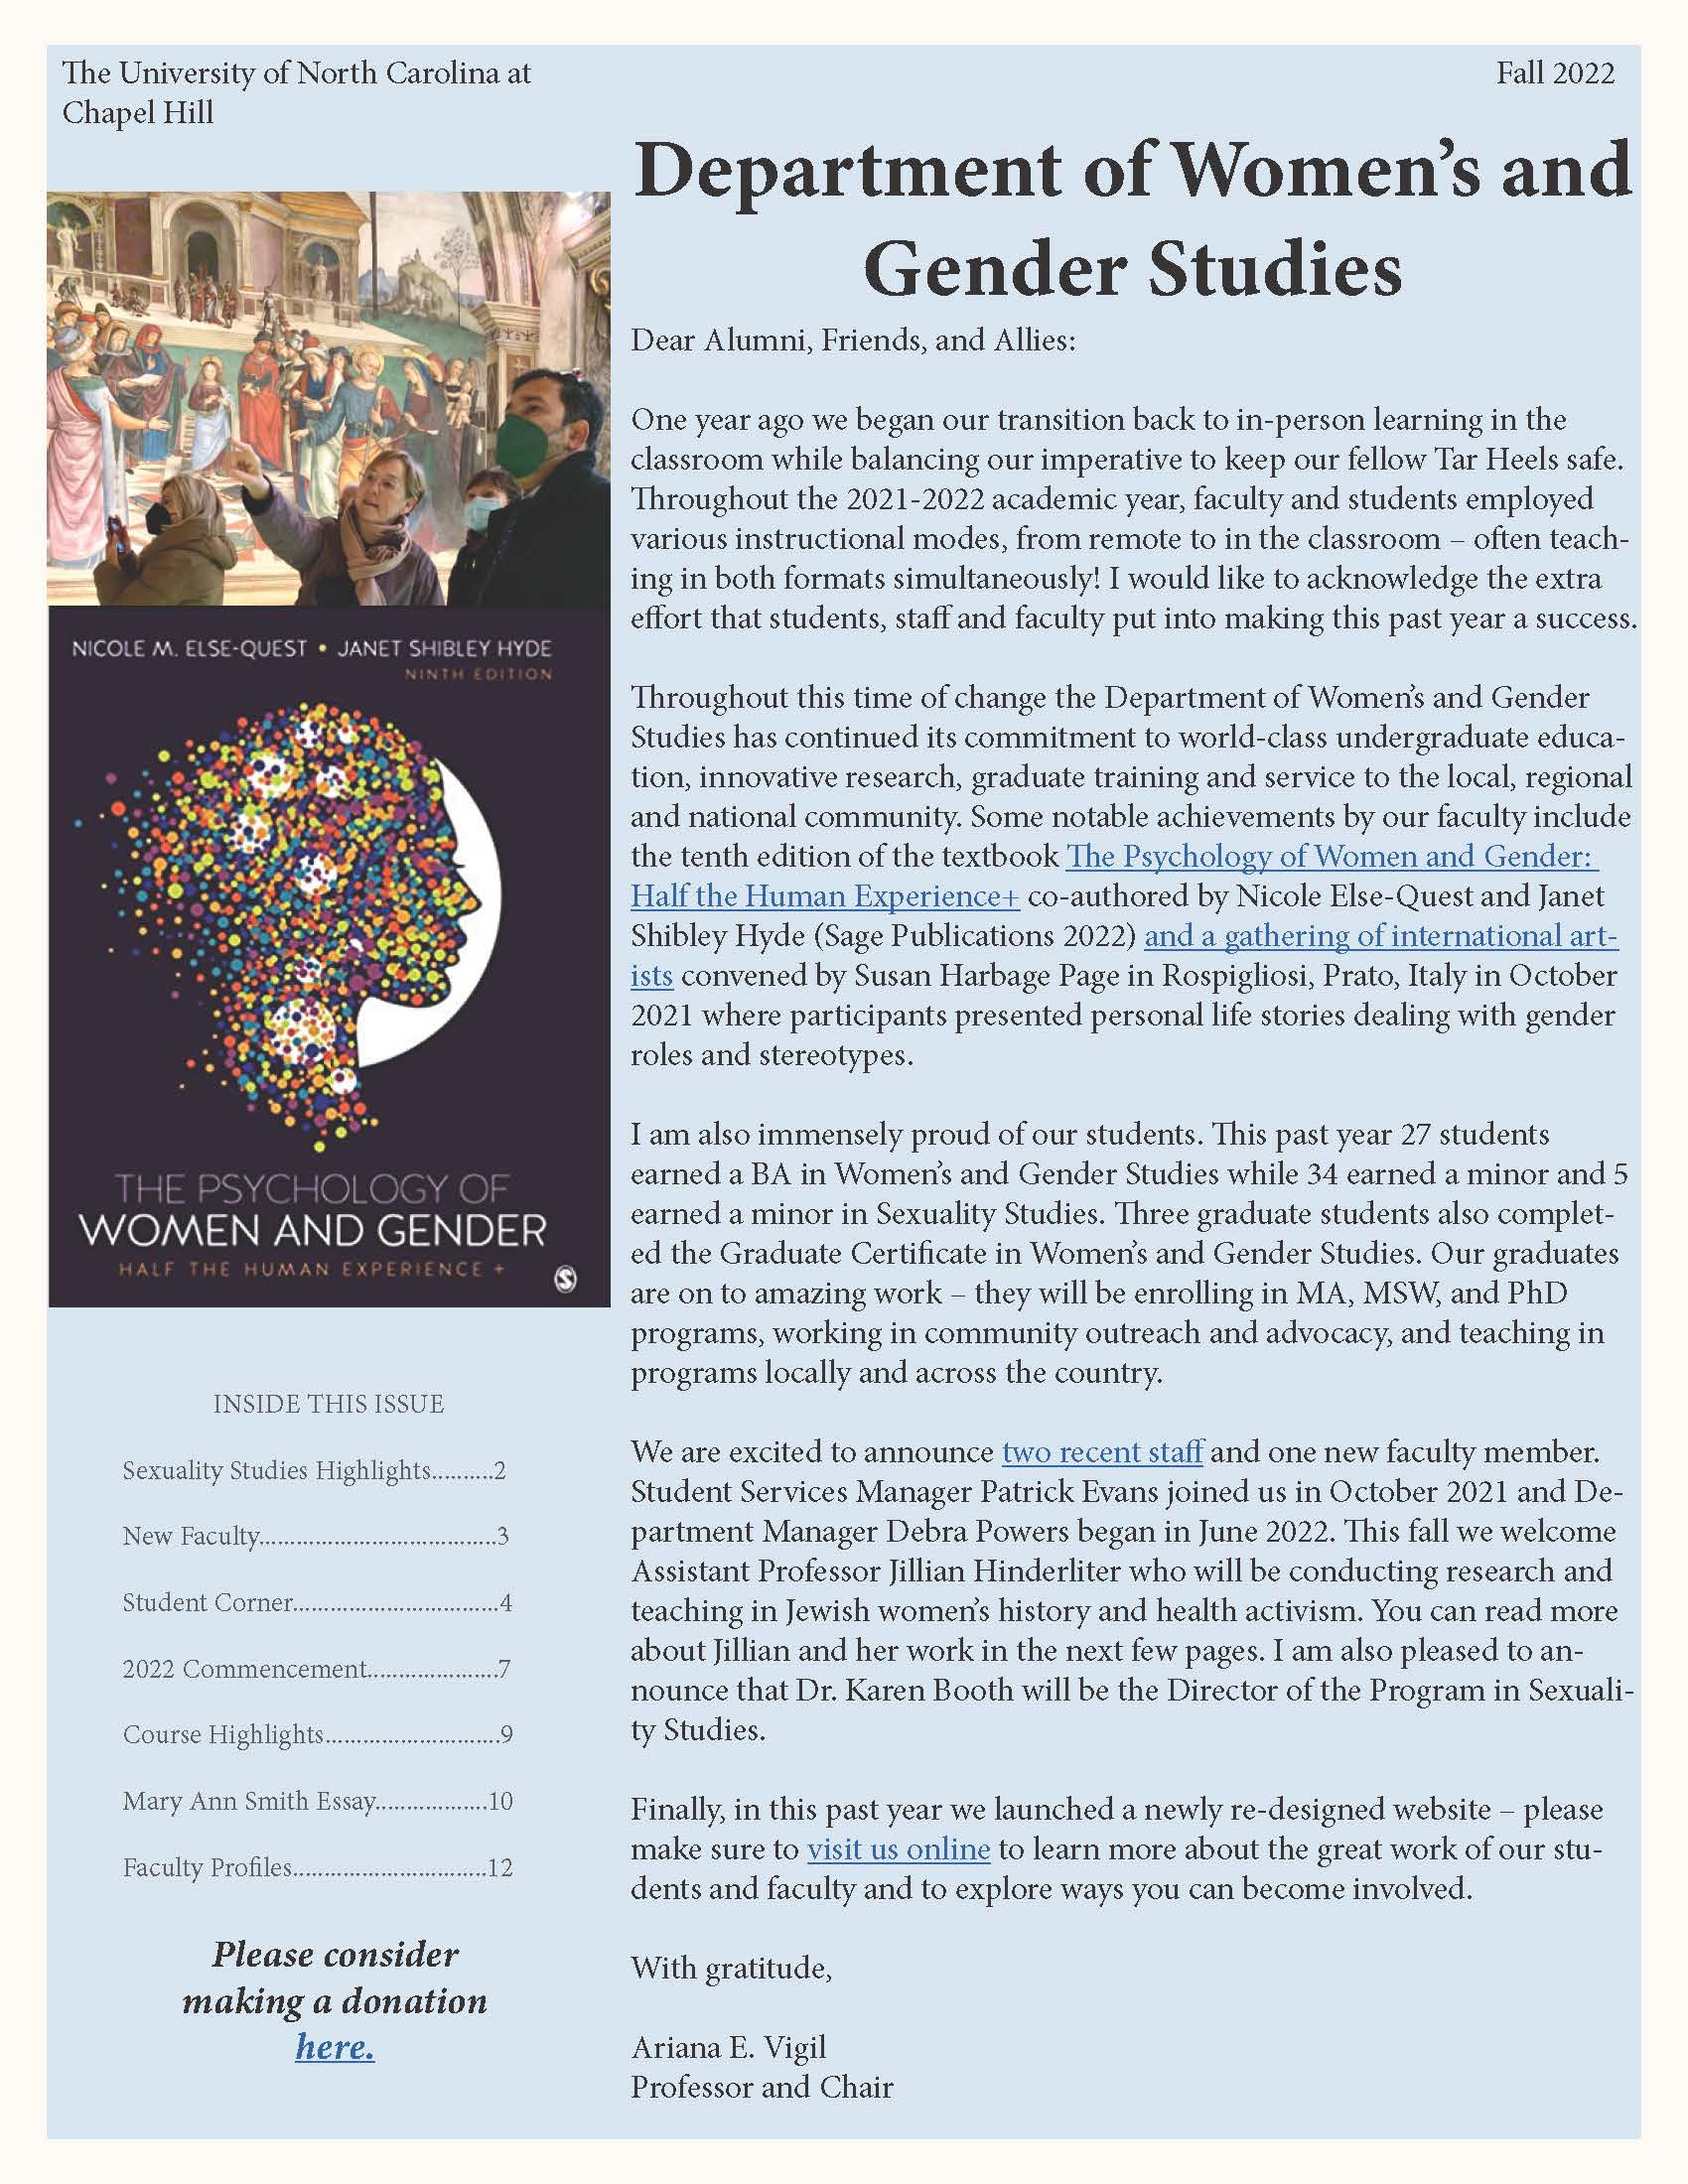 Fall 2022 WGST Newsletter